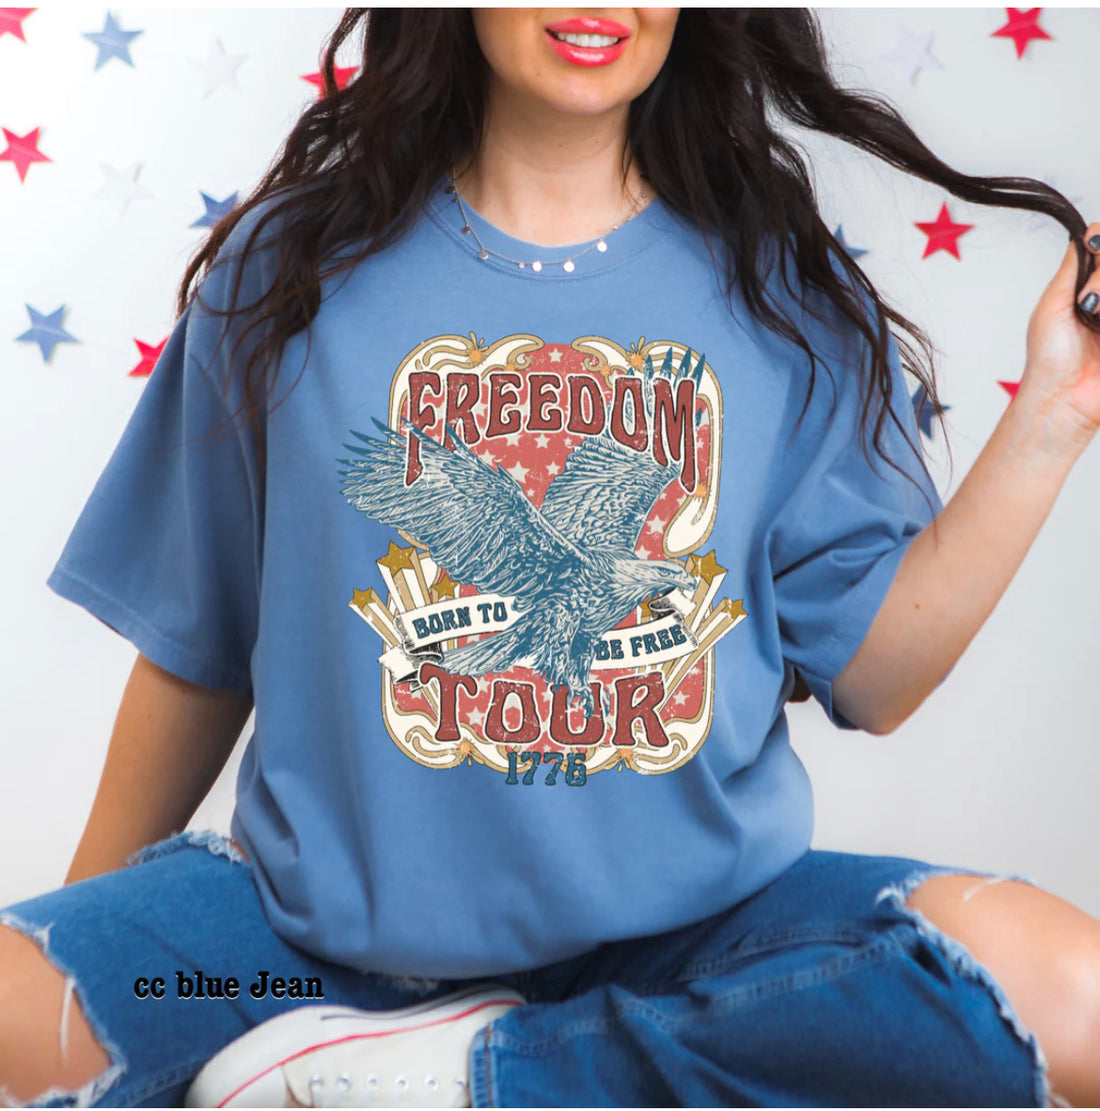 “Born To Be Free, Freedom Tour” Graphic Tee.